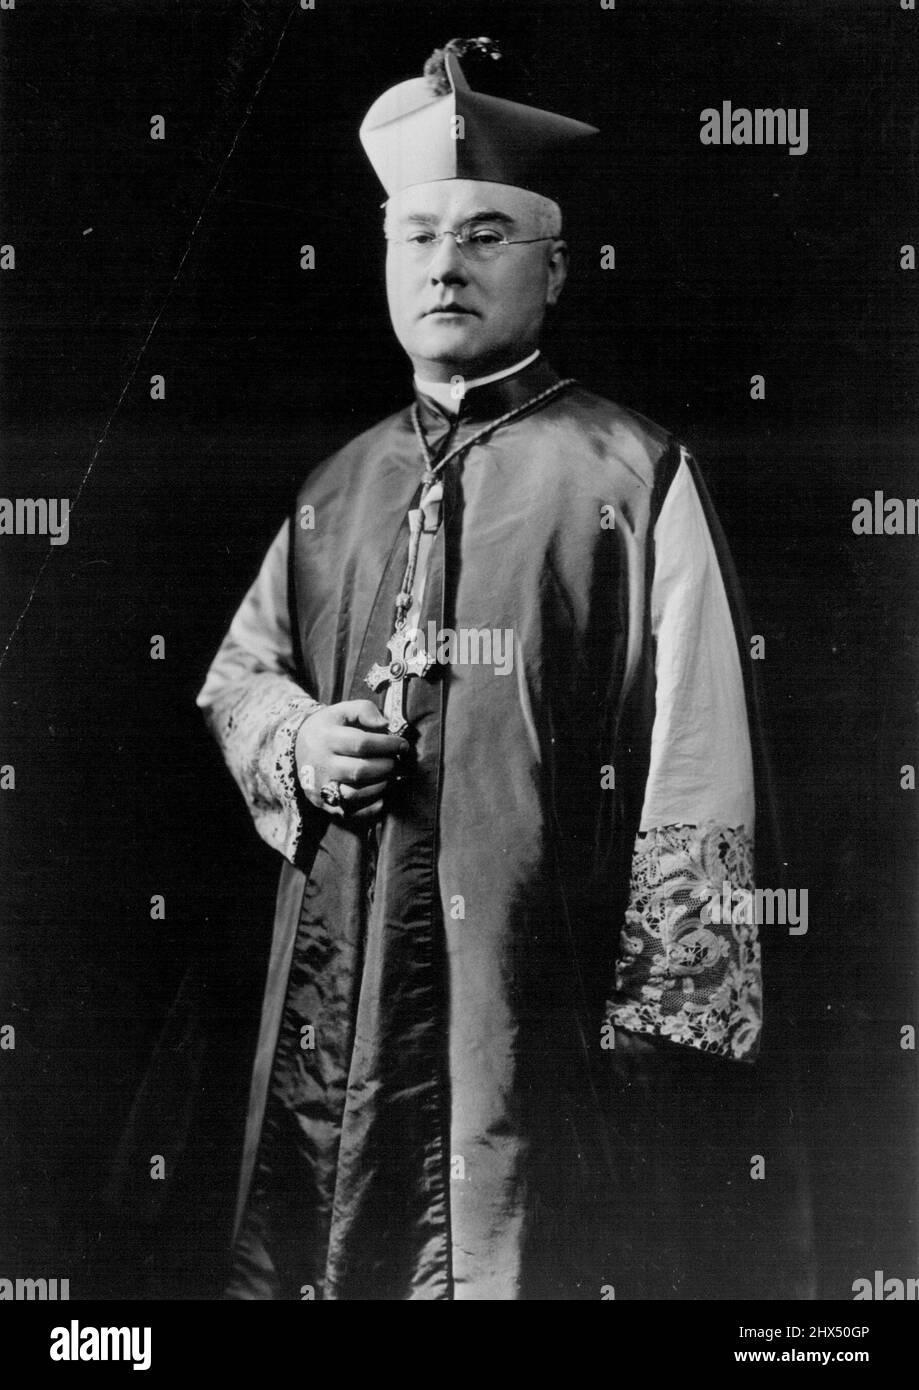 New York's New Archbishop The Most Rev. Francis J. Spellman Auxiliary Bishop of the Roman Catholic Archdiocese of Boston since 1932, who was appointed Archbishop of New York, to succeed the late Patrick Cardinal Haves, April 24. April 25, 1939. (Photo by ACME). Stock Photo